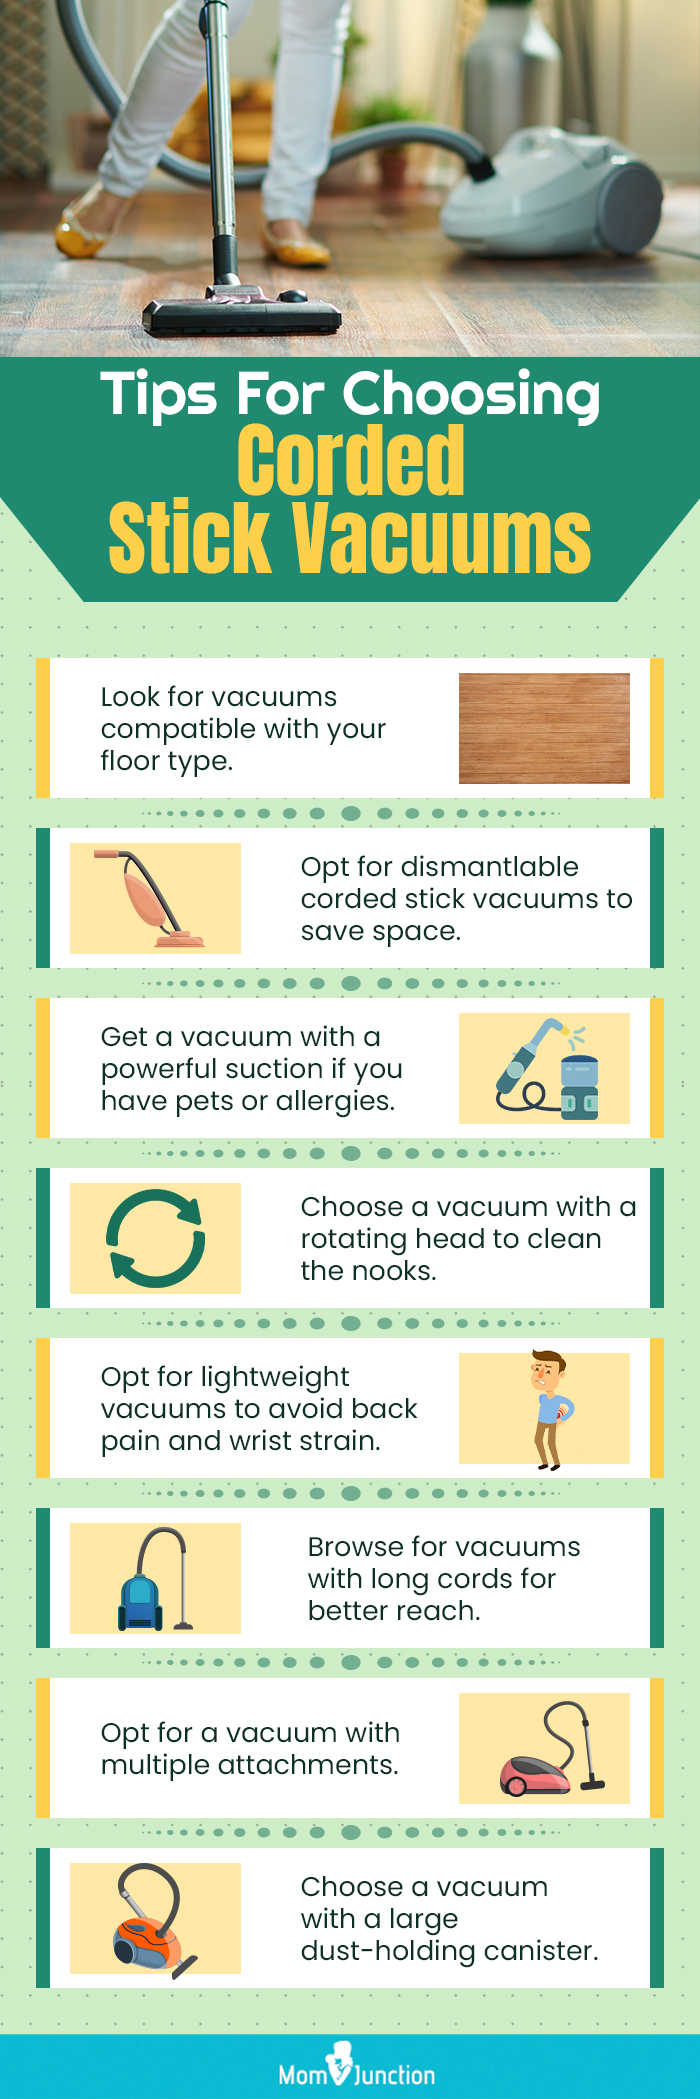 Tips For Choosing Corded Stick Vacuums (Infographic)